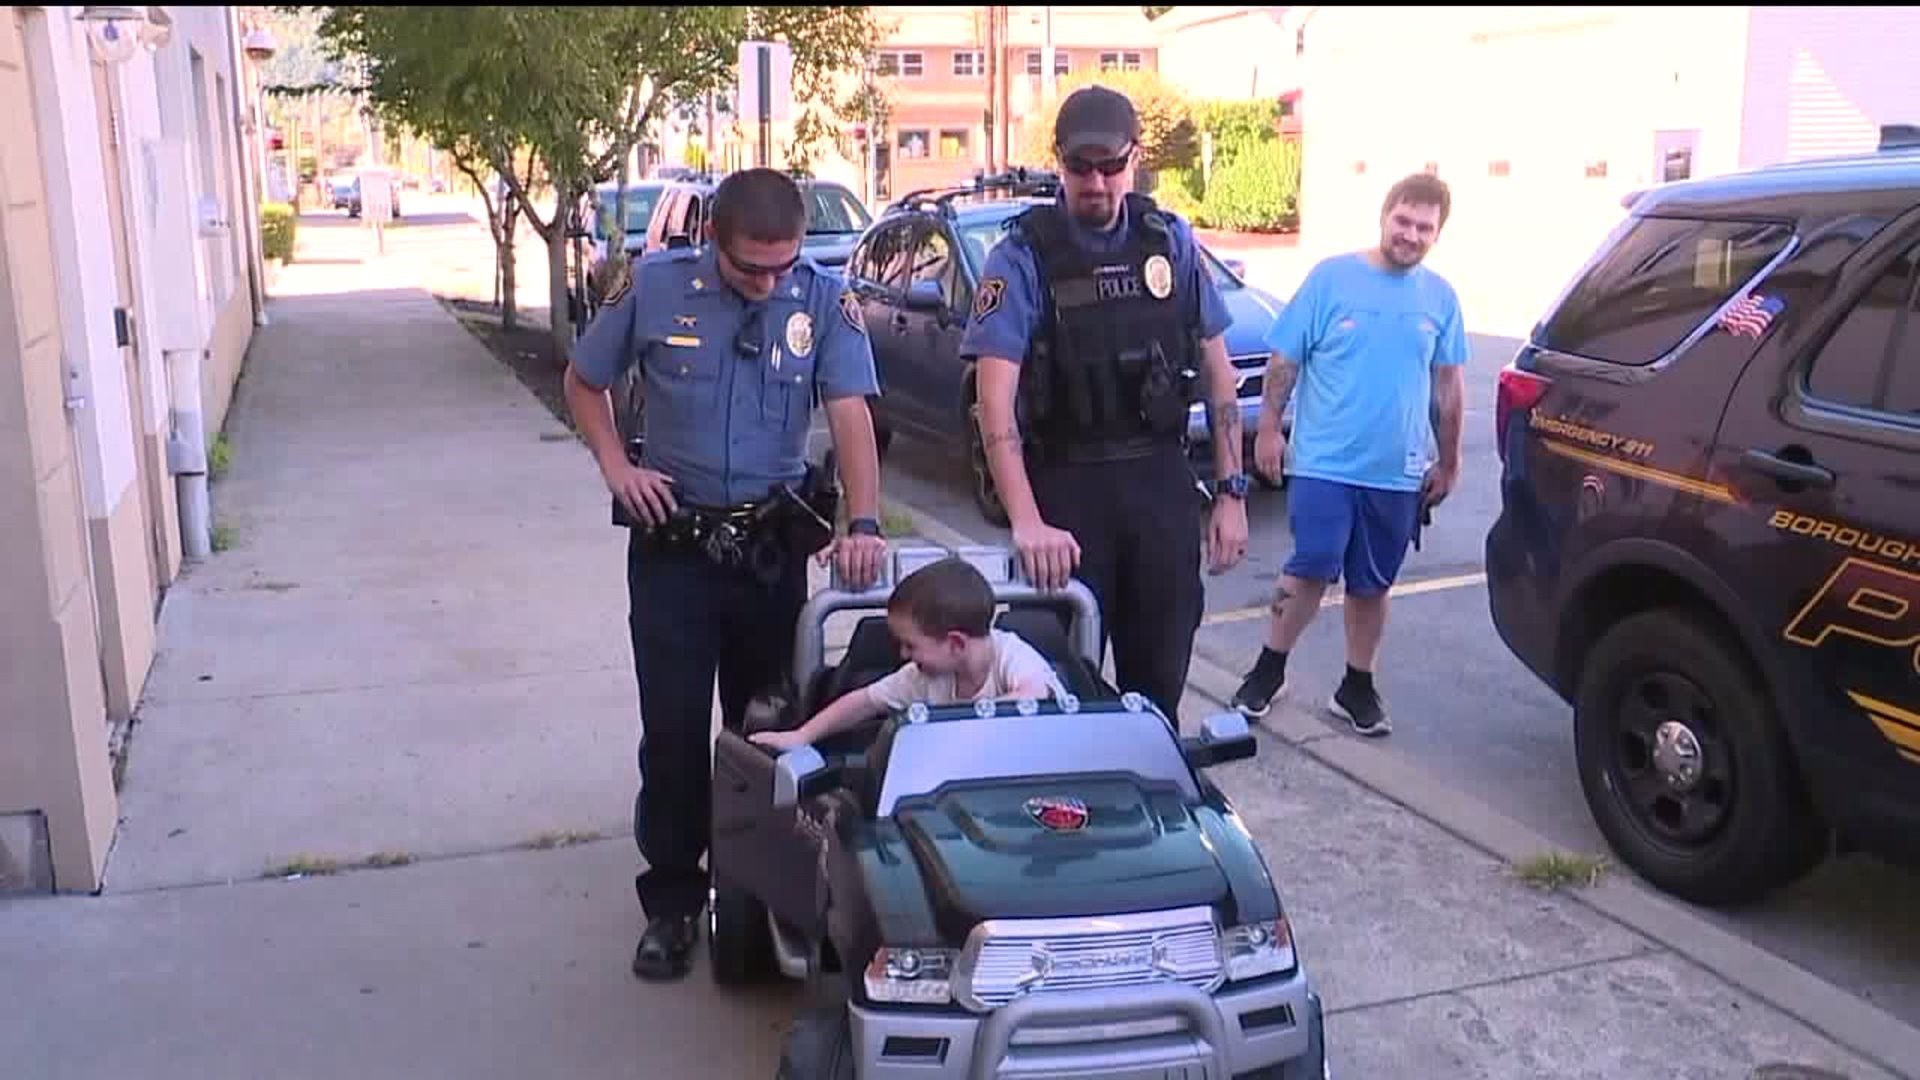 Boy Who Survived Fire Reunited with Stolen Power Wheels